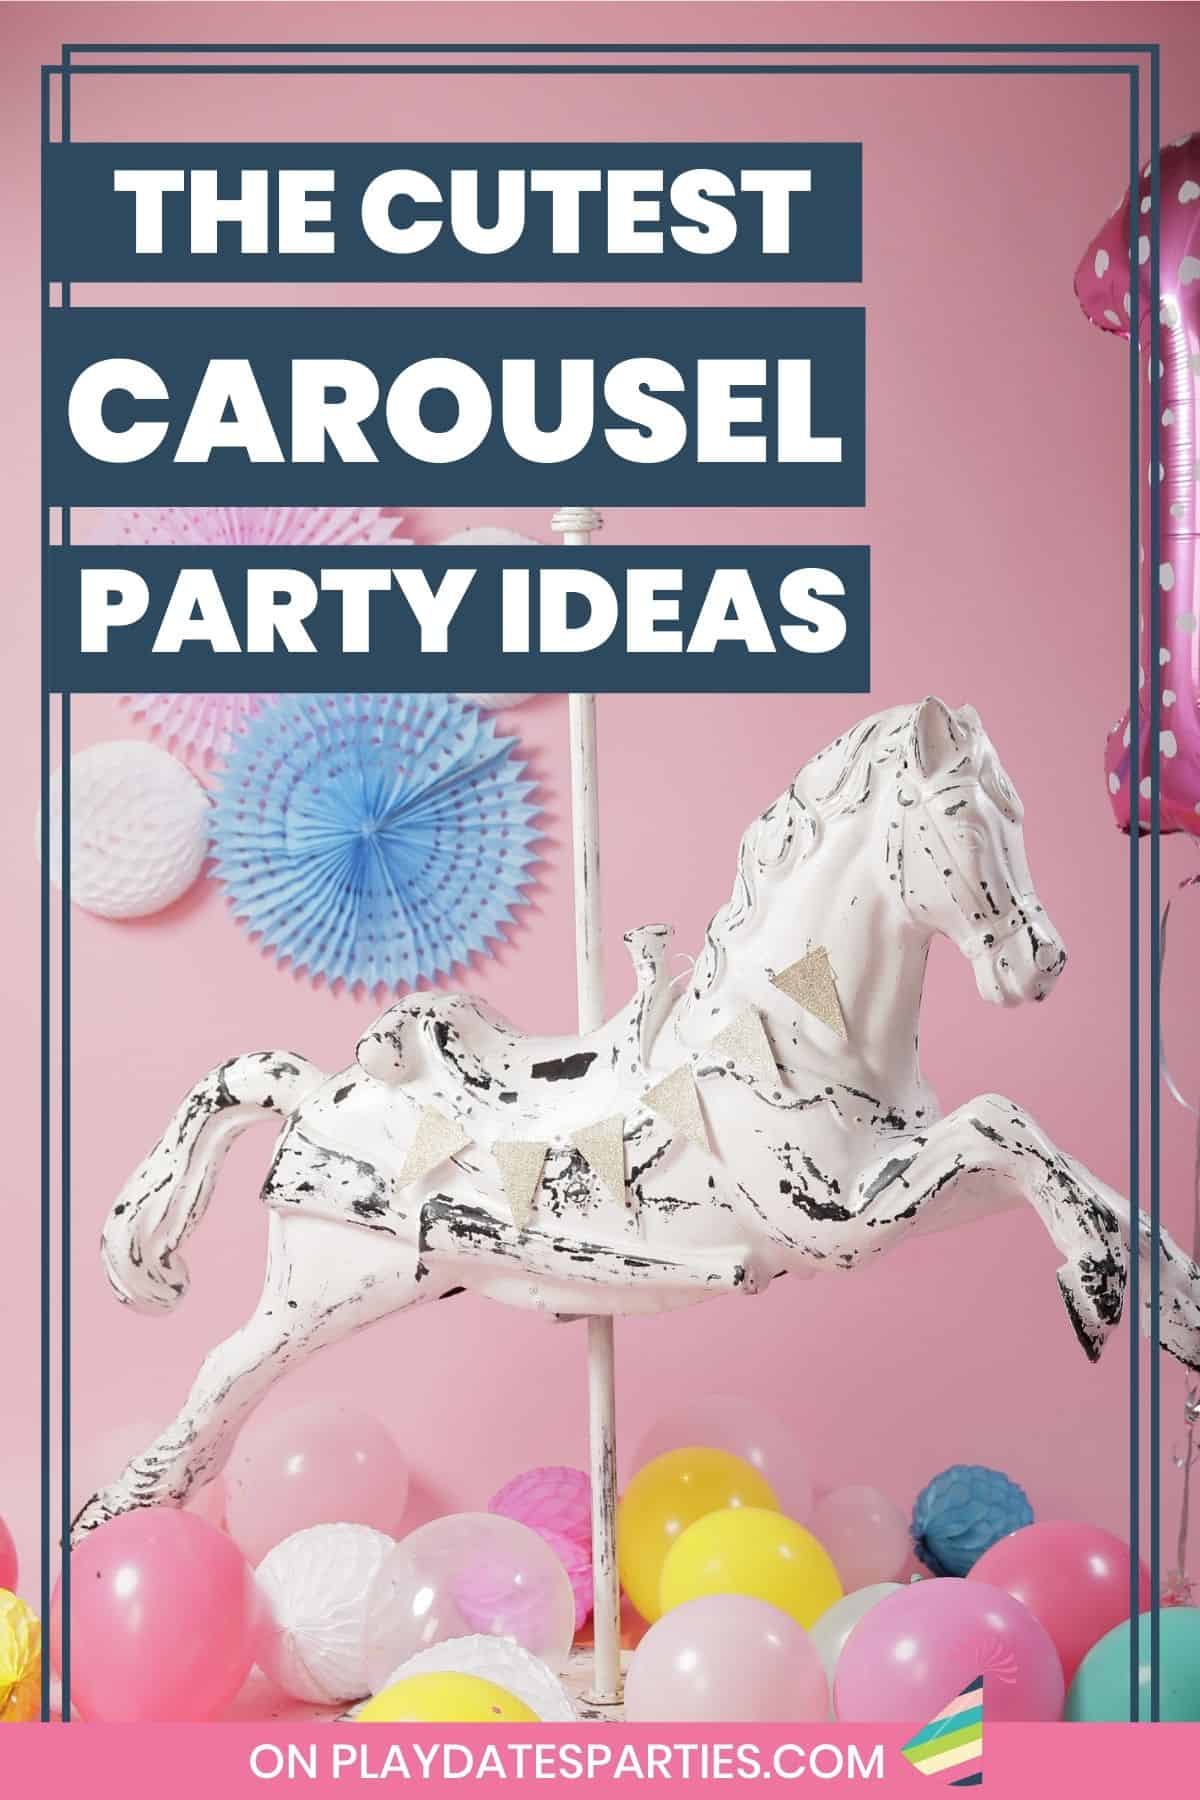 Photo of a carousel horse surrounded by balloons with text the cutest carousel party ideas.